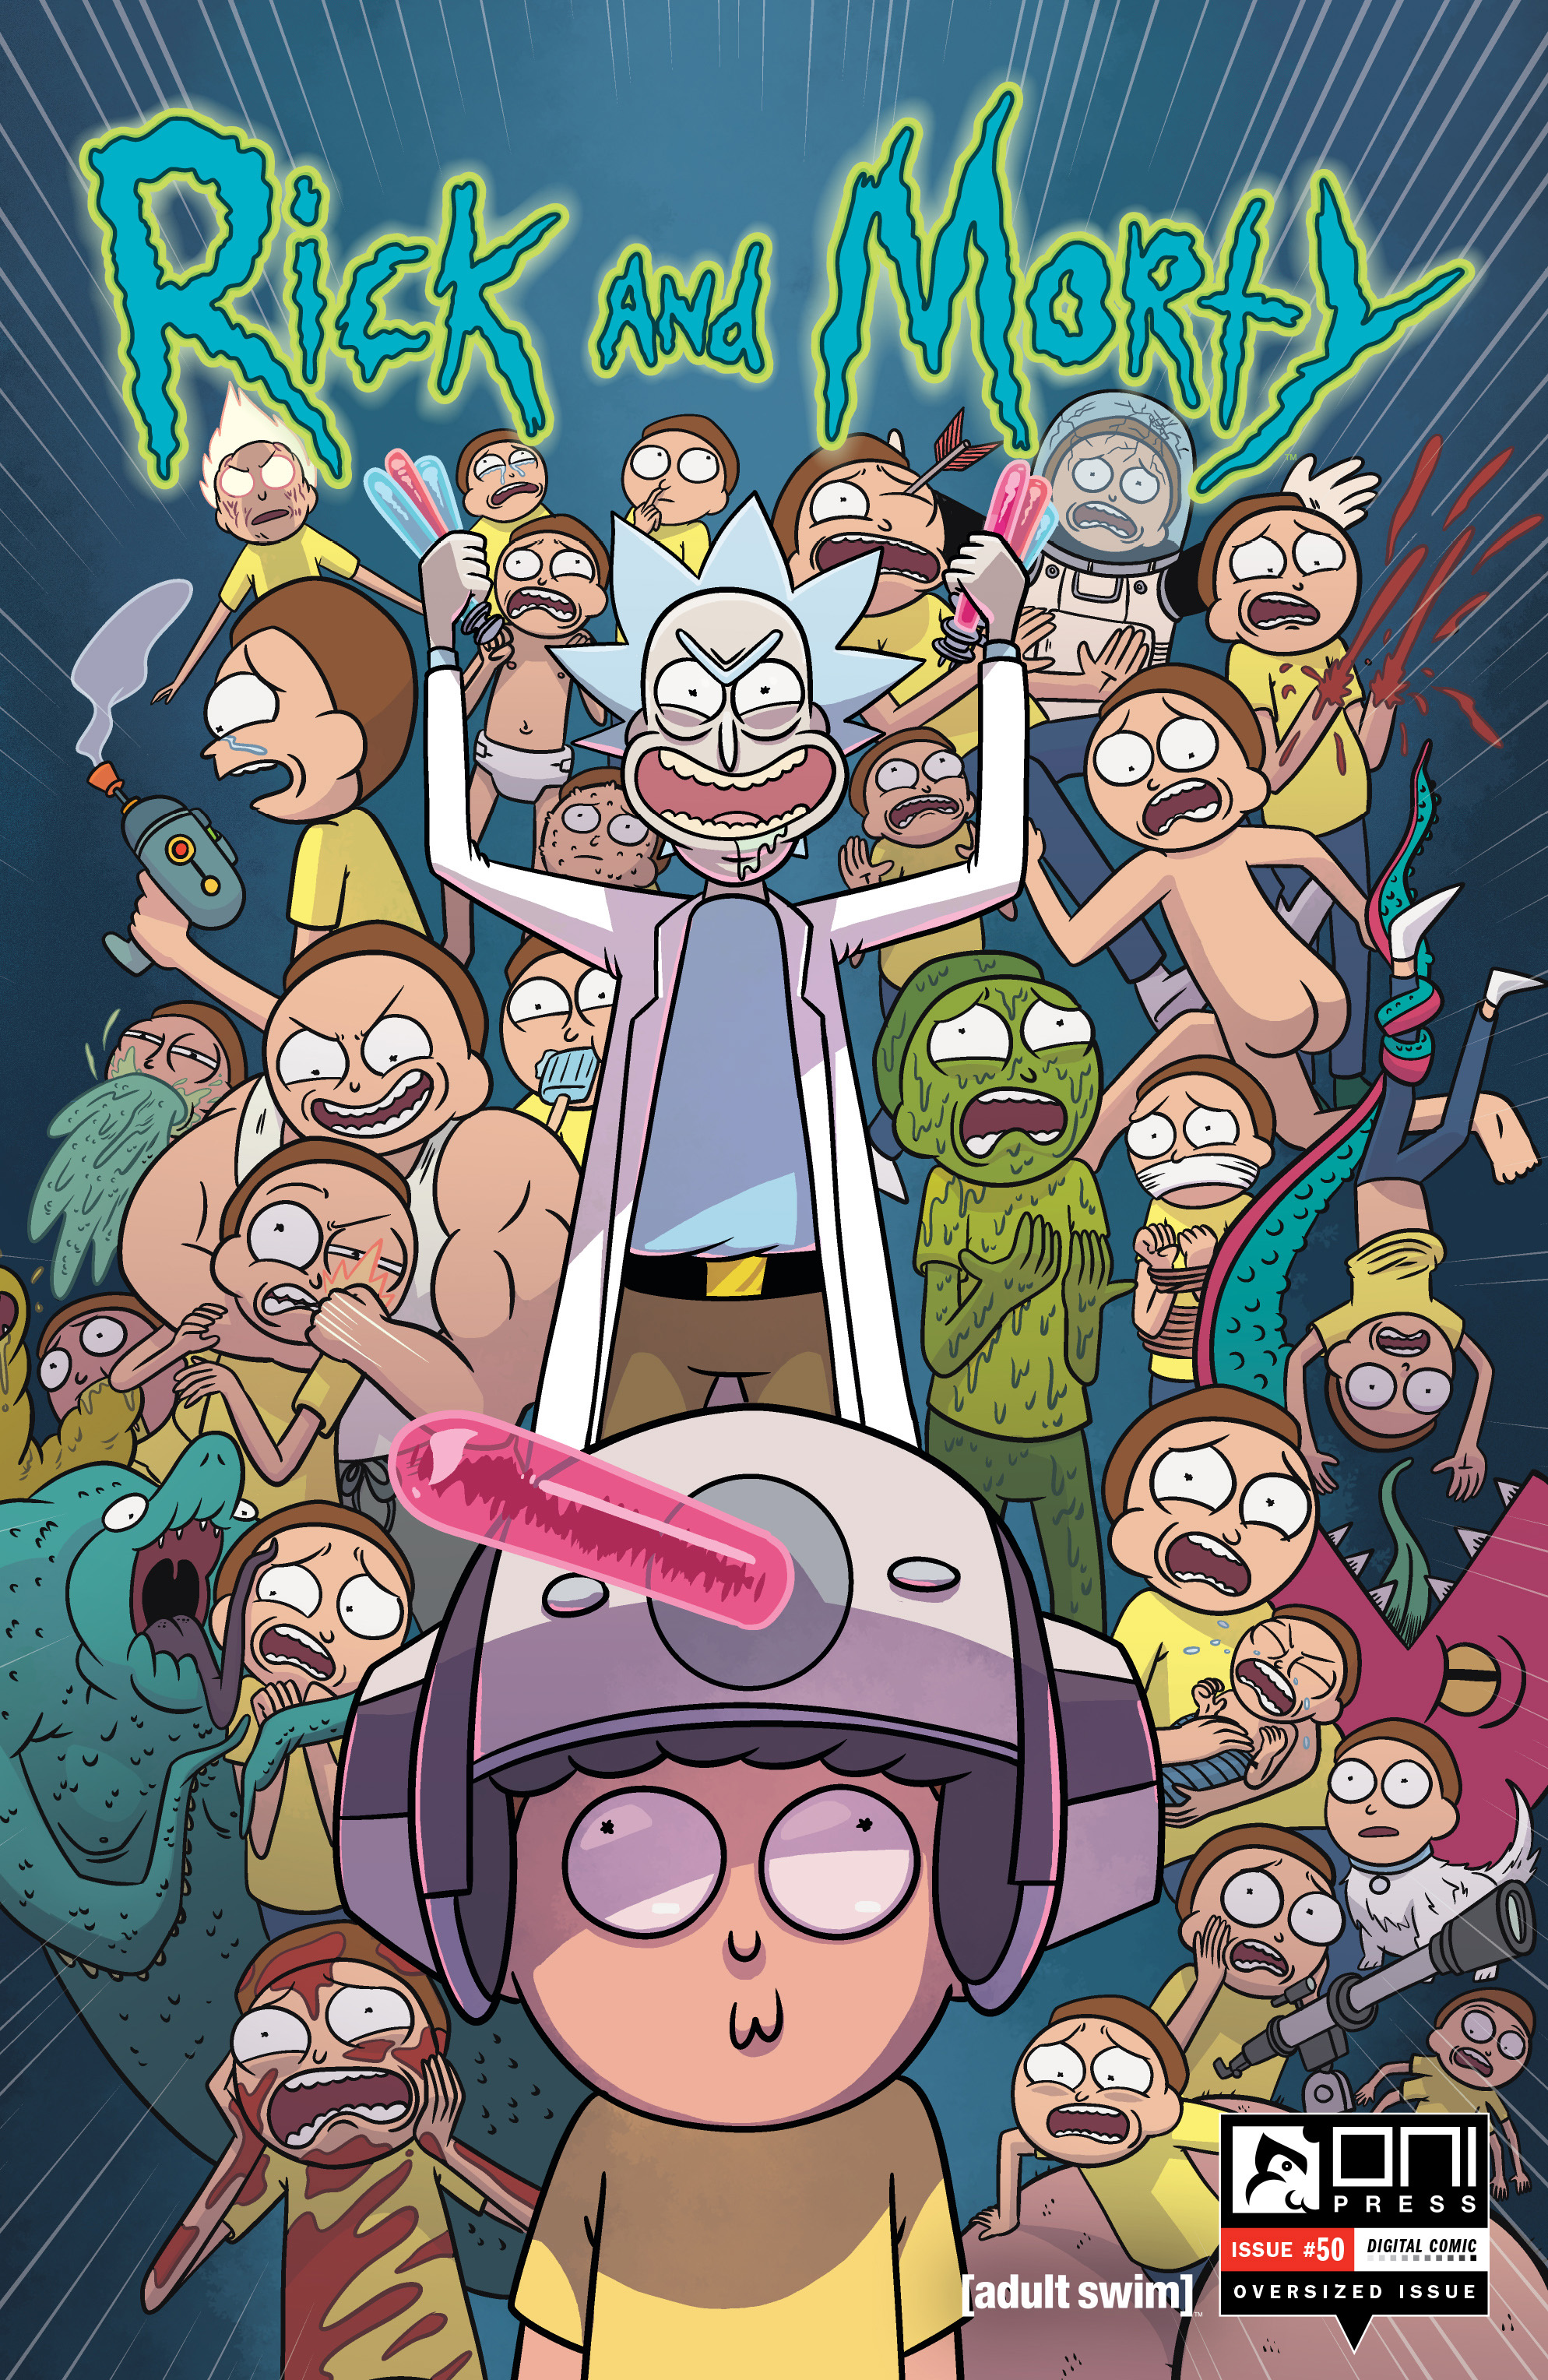 Read online Rick and Morty comic -  Issue #50 - 1